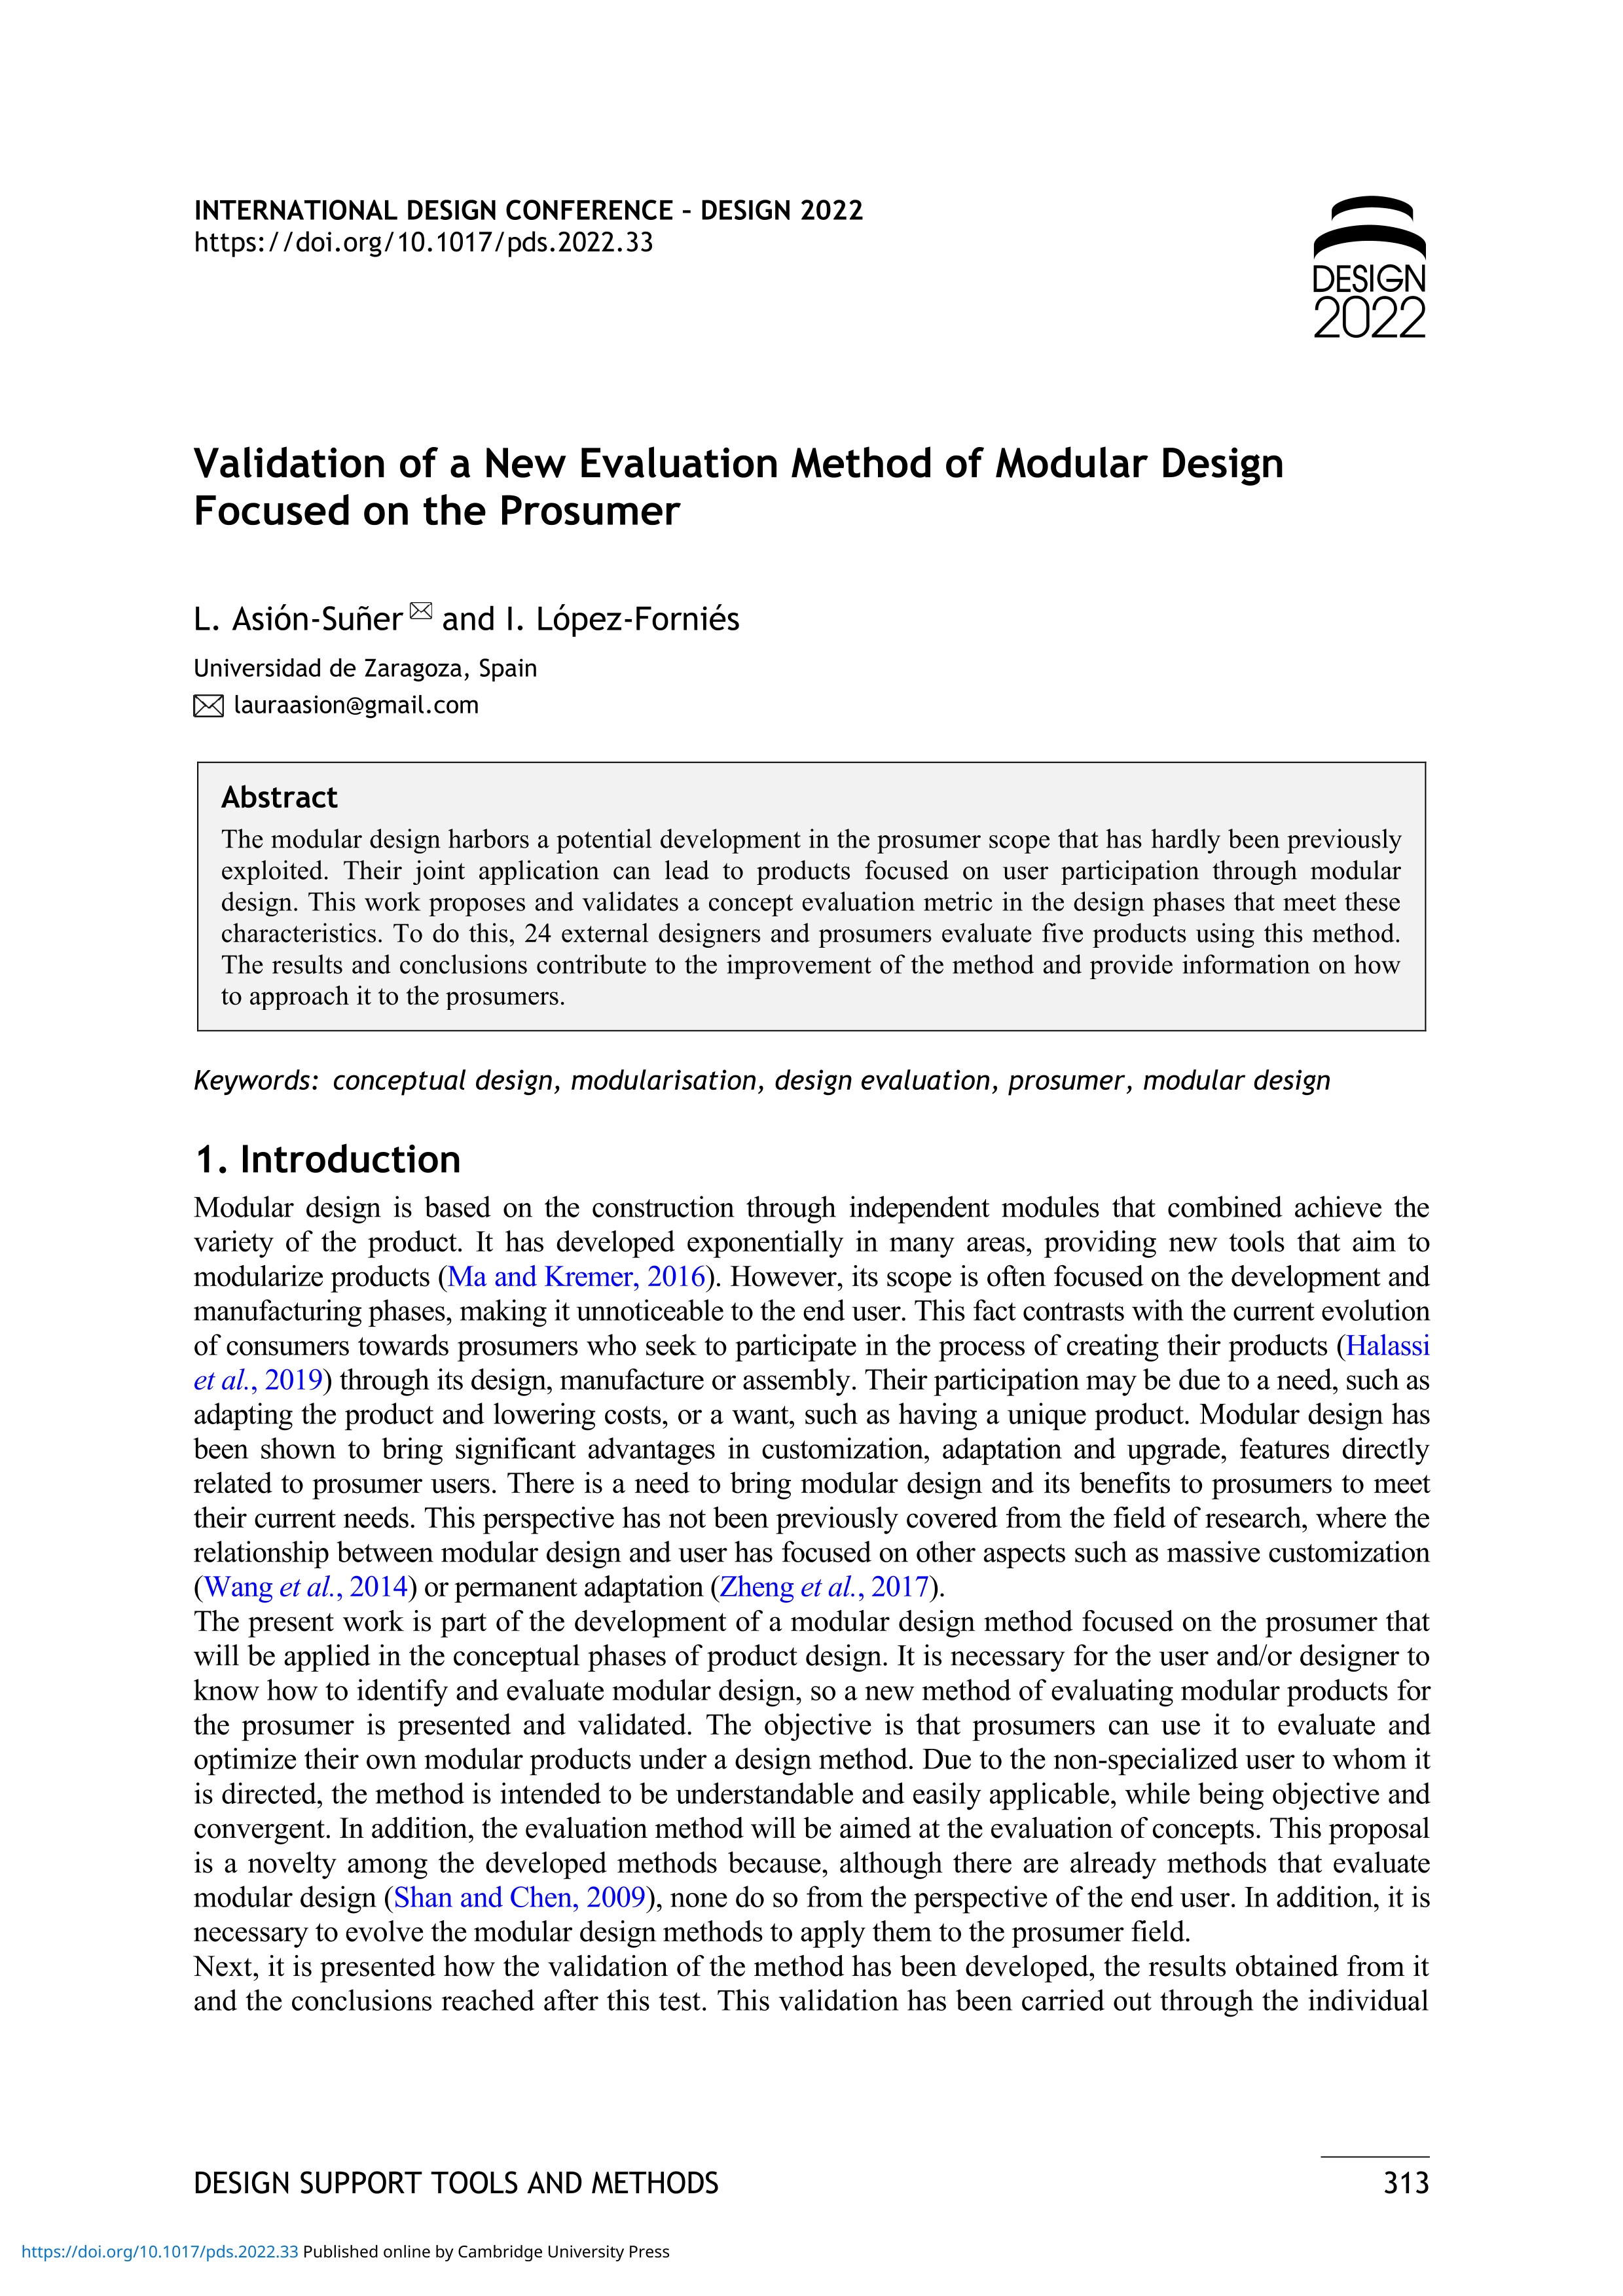 Validation of a New Evaluation Method of Modular Design Focused on the Prosumer